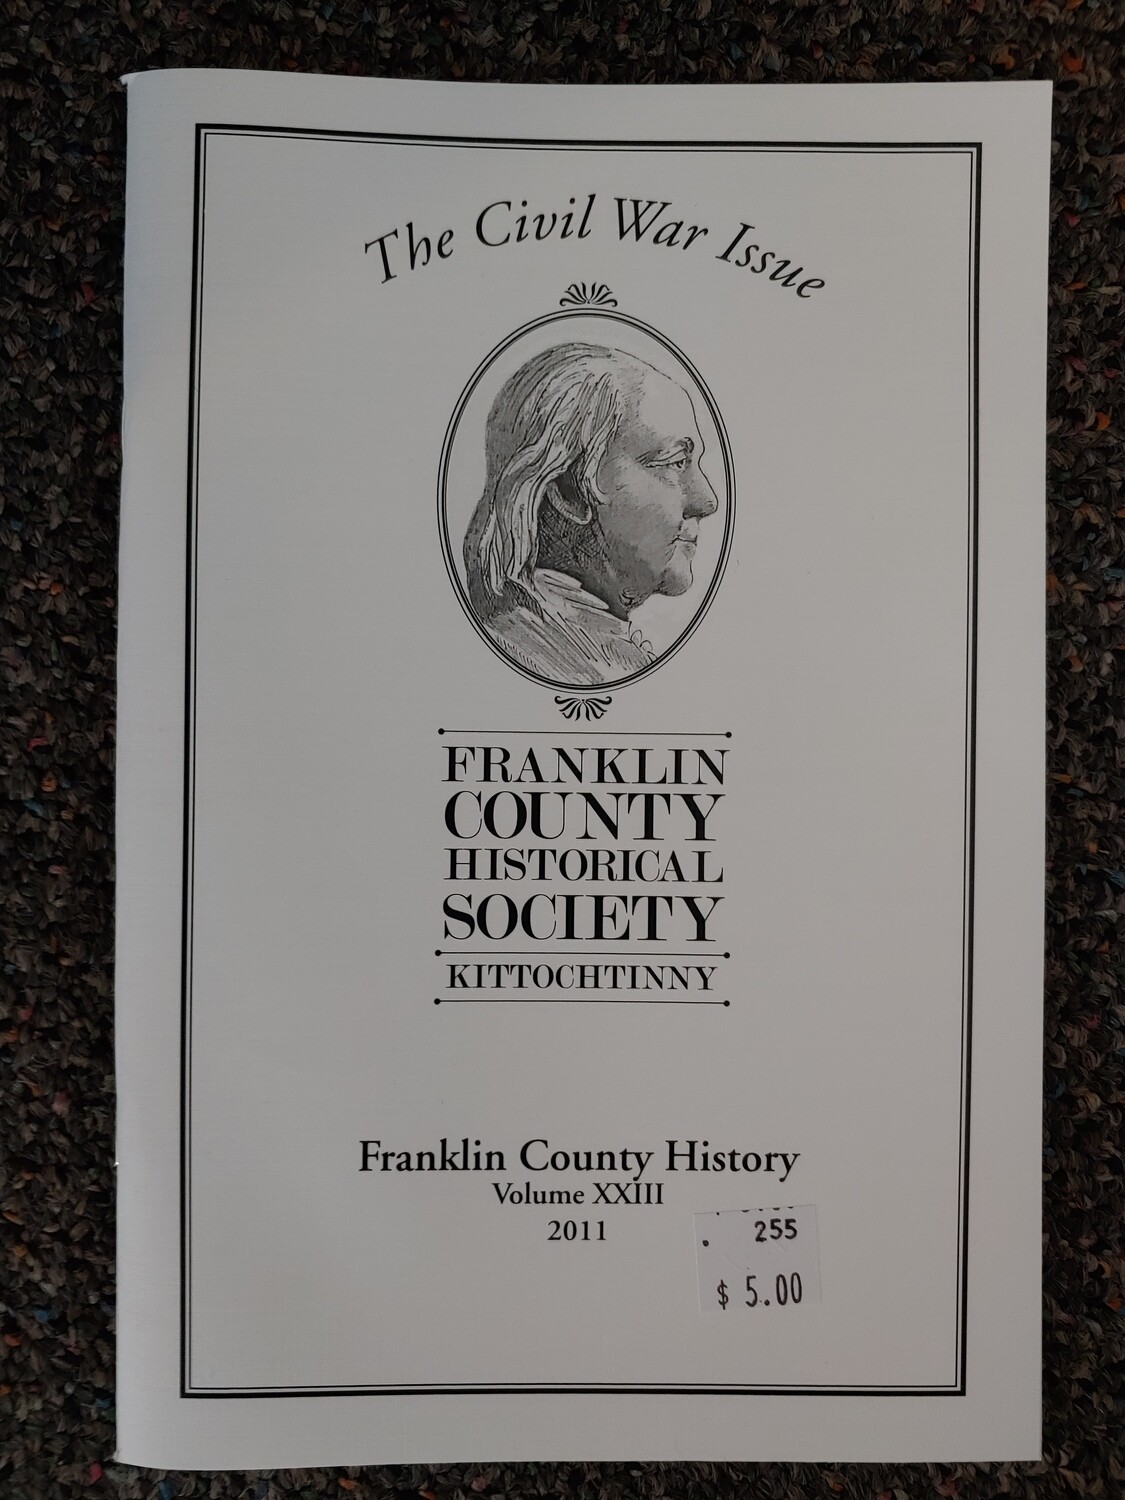 Franklin County Historical Society Journal 2011